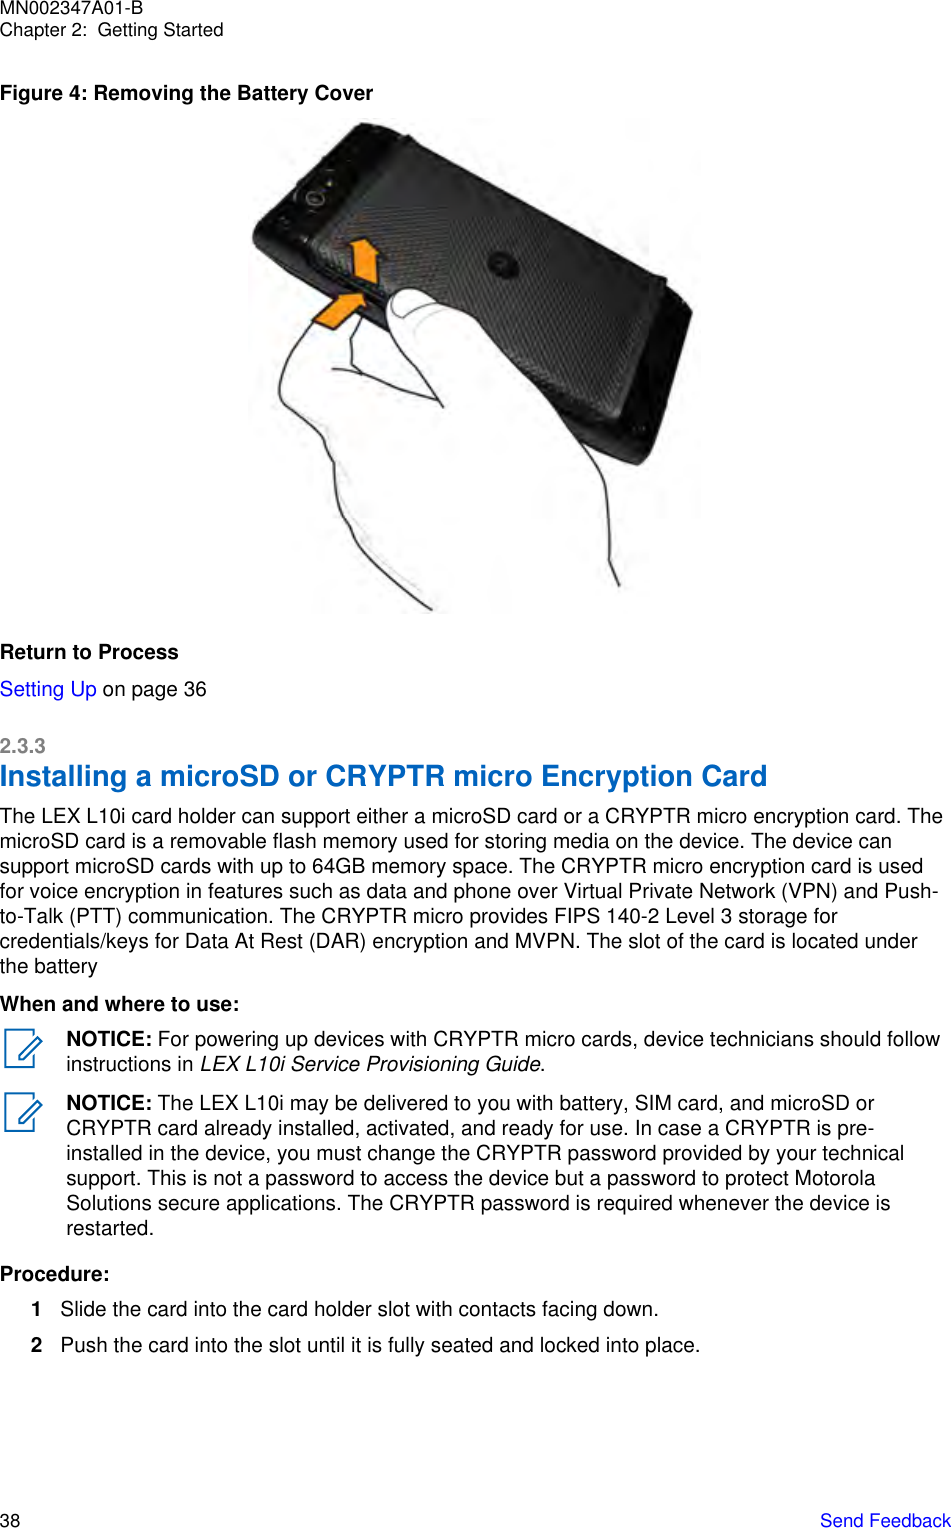 Figure 4: Removing the Battery CoverReturn to ProcessSetting Up on page 362.3.3Installing a microSD or CRYPTR micro Encryption CardThe LEX L10i card holder can support either a microSD card or a CRYPTR micro encryption card. ThemicroSD card is a removable flash memory used for storing media on the device. The device cansupport microSD cards with up to 64GB memory space. The CRYPTR micro encryption card is usedfor voice encryption in features such as data and phone over Virtual Private Network (VPN) and Push-to-Talk (PTT) communication. The CRYPTR micro provides FIPS 140-2 Level 3 storage forcredentials/keys for Data At Rest (DAR) encryption and MVPN. The slot of the card is located underthe batteryWhen and where to use:NOTICE: For powering up devices with CRYPTR micro cards, device technicians should followinstructions in LEX L10i Service Provisioning Guide.NOTICE: The LEX L10i may be delivered to you with battery, SIM card, and microSD orCRYPTR card already installed, activated, and ready for use. In case a CRYPTR is pre-installed in the device, you must change the CRYPTR password provided by your technicalsupport. This is not a password to access the device but a password to protect MotorolaSolutions secure applications. The CRYPTR password is required whenever the device isrestarted.Procedure:1Slide the card into the card holder slot with contacts facing down.2Push the card into the slot until it is fully seated and locked into place.MN002347A01-BChapter 2:  Getting Started38   Send Feedback